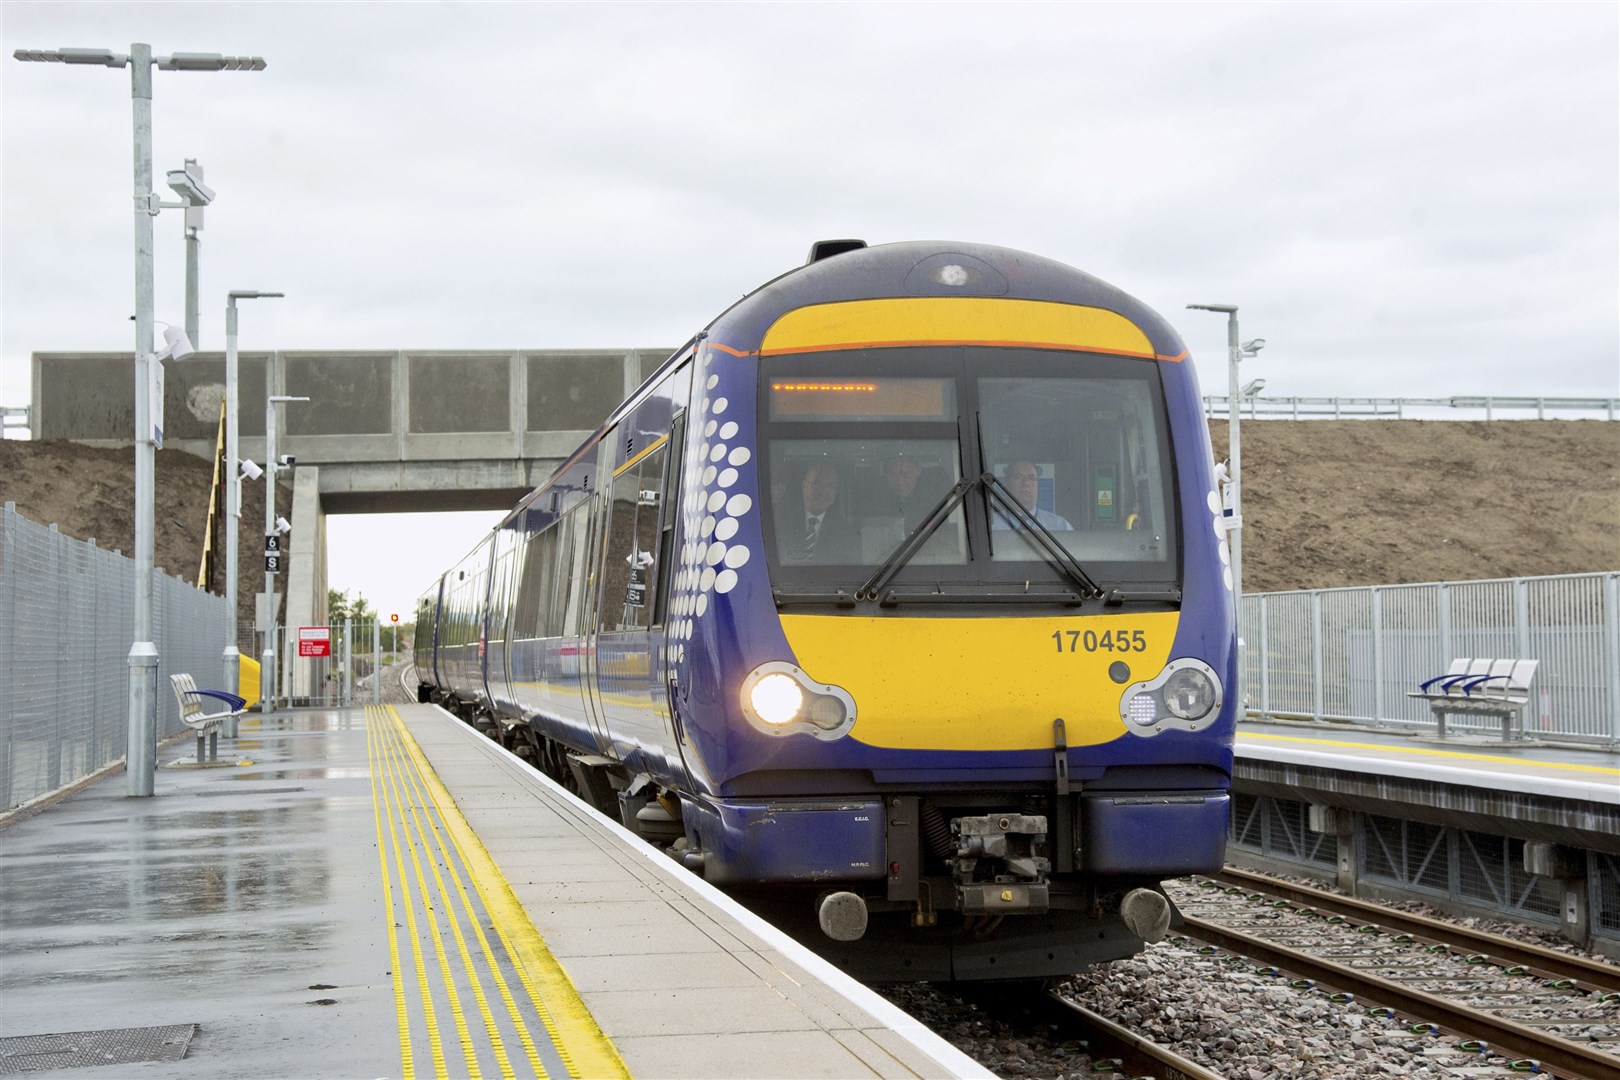 A ScotRail train at Forres, on the Aberdeen-Inverness line. Picture: Daniel Forsyth.